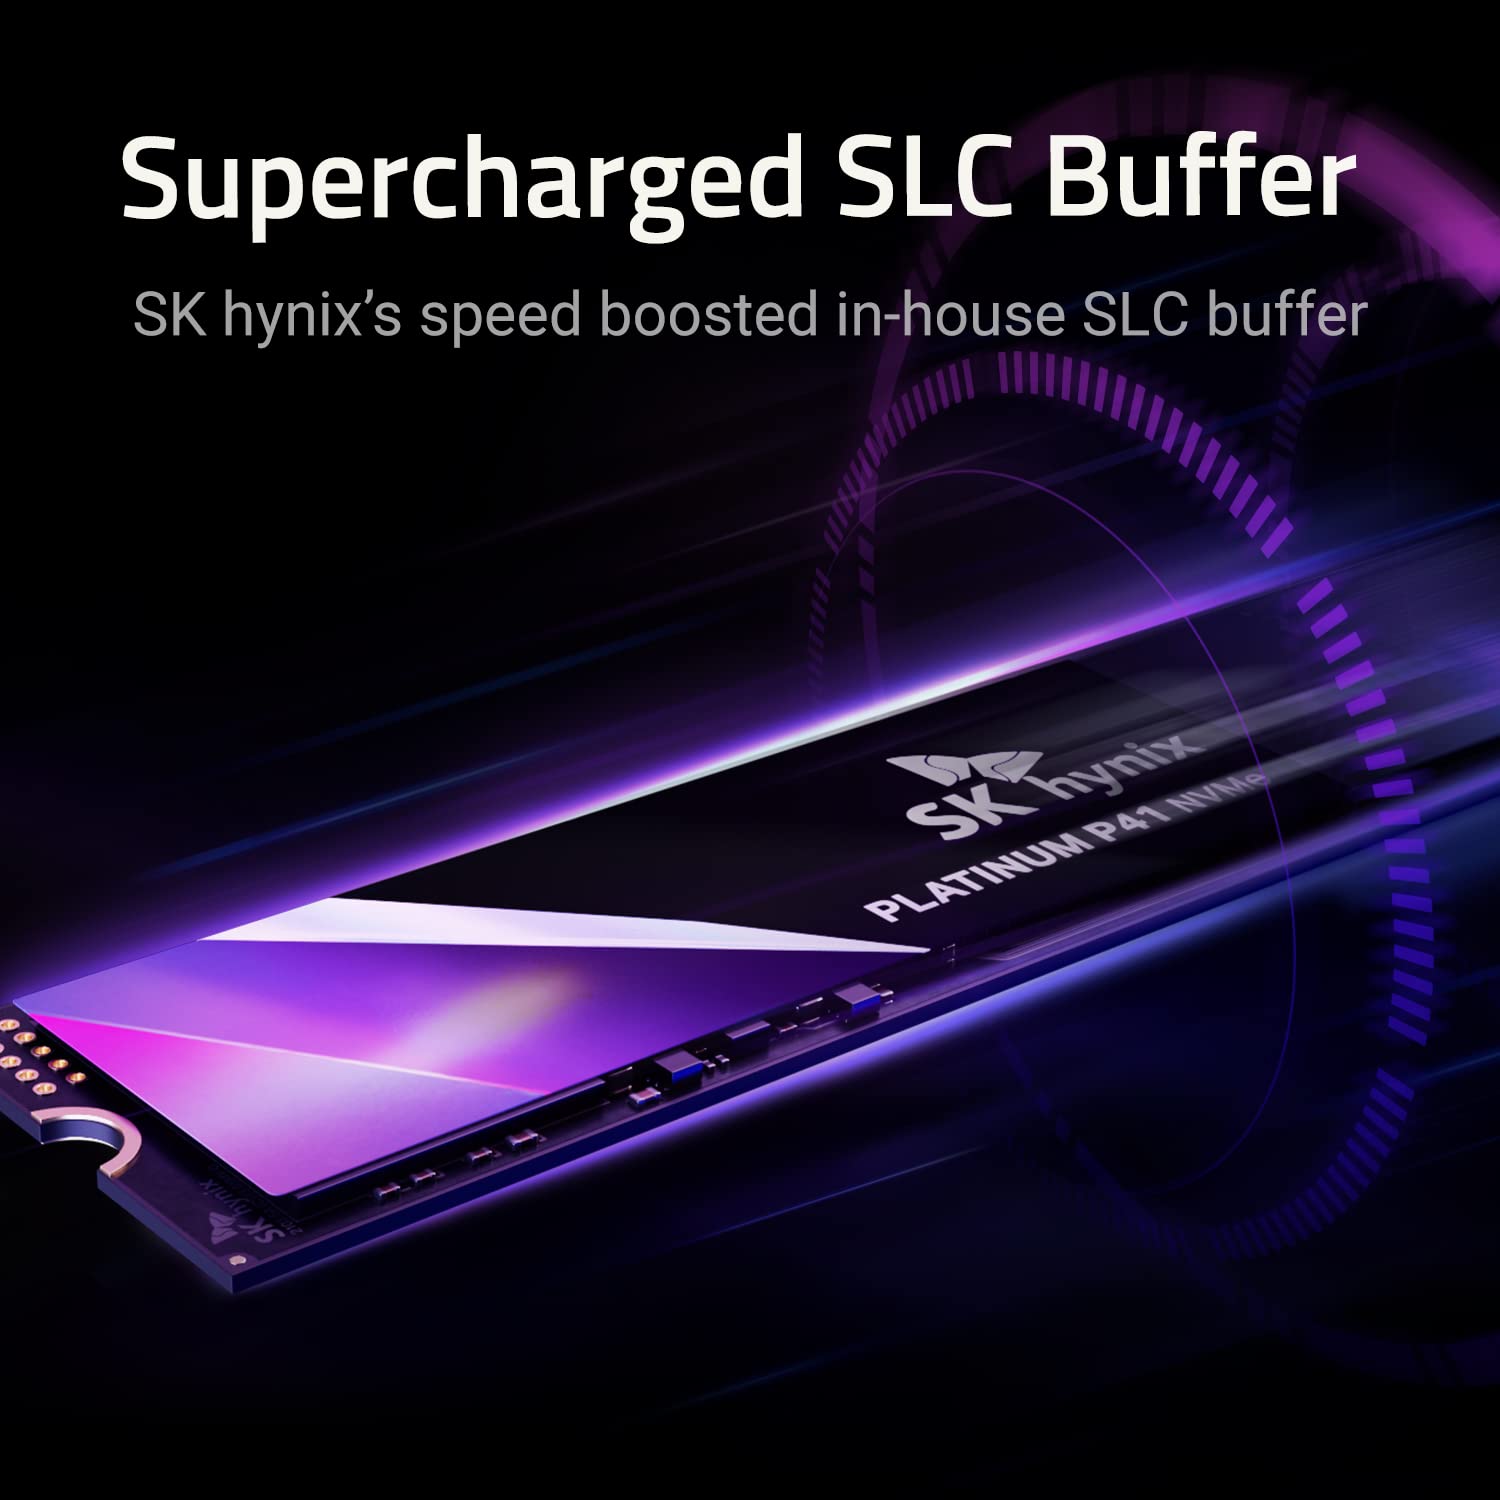 SK hynix Platinum P41 2TB PCIe NVMe Gen4 M.2 2280 Internal Gaming SSD, Up to 7,000MB/S, Compact M.2 SSD Form Factor SSD - Internal Solid State Drive with 176-Layer NAND Flash